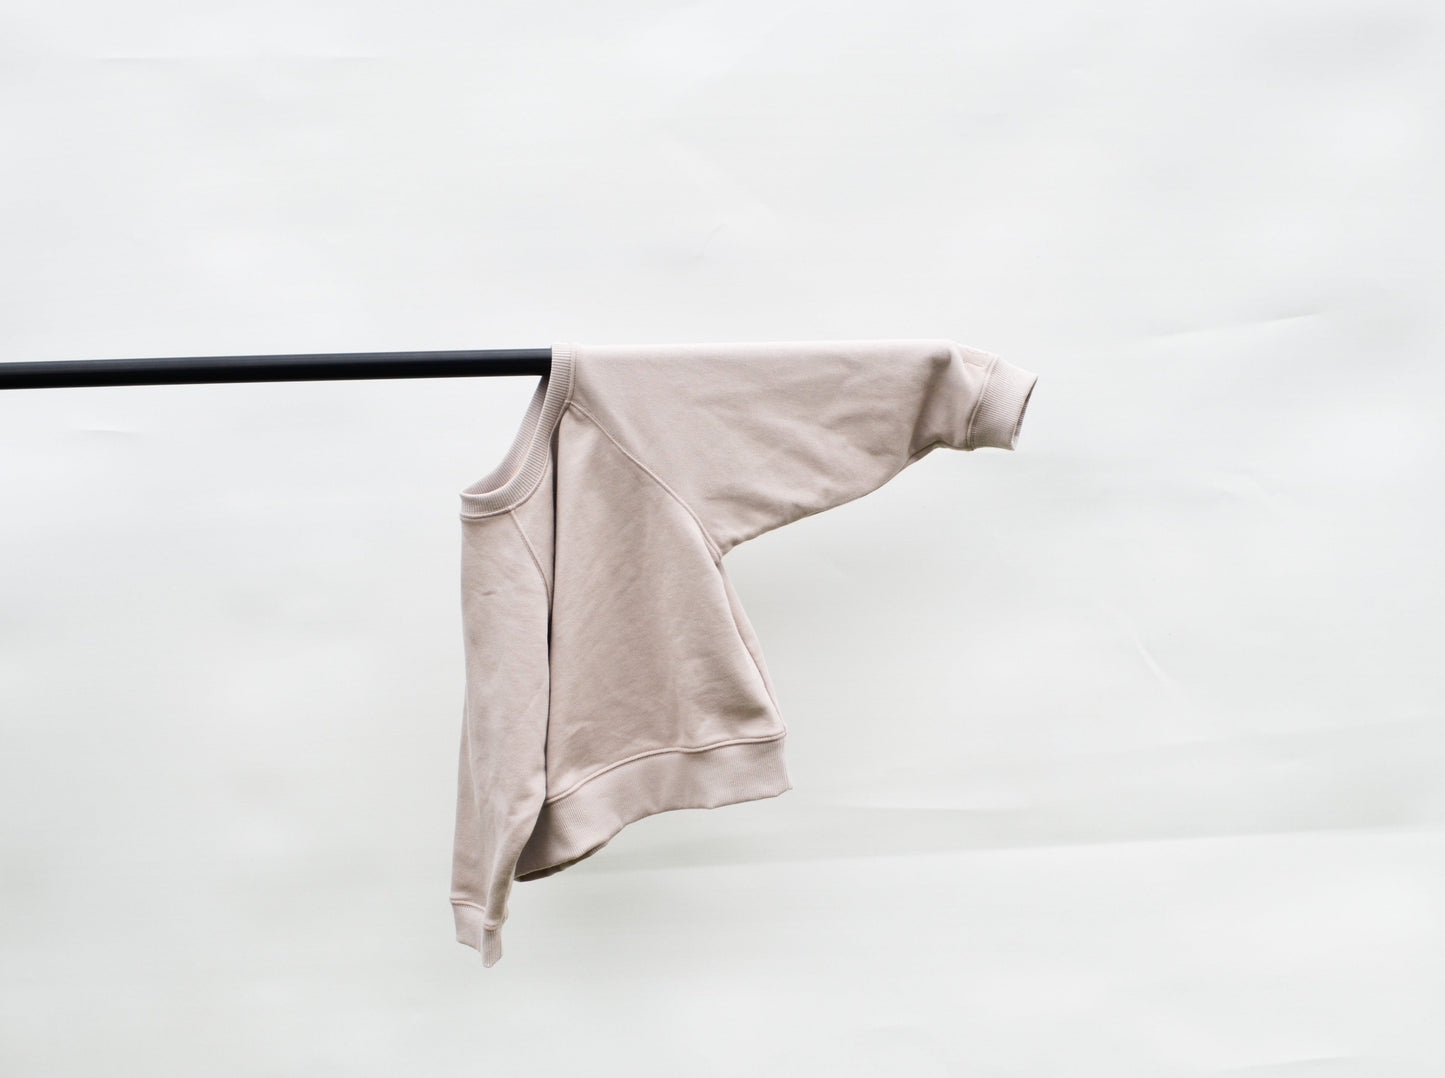 Smokey batwing jumper hanging over pole